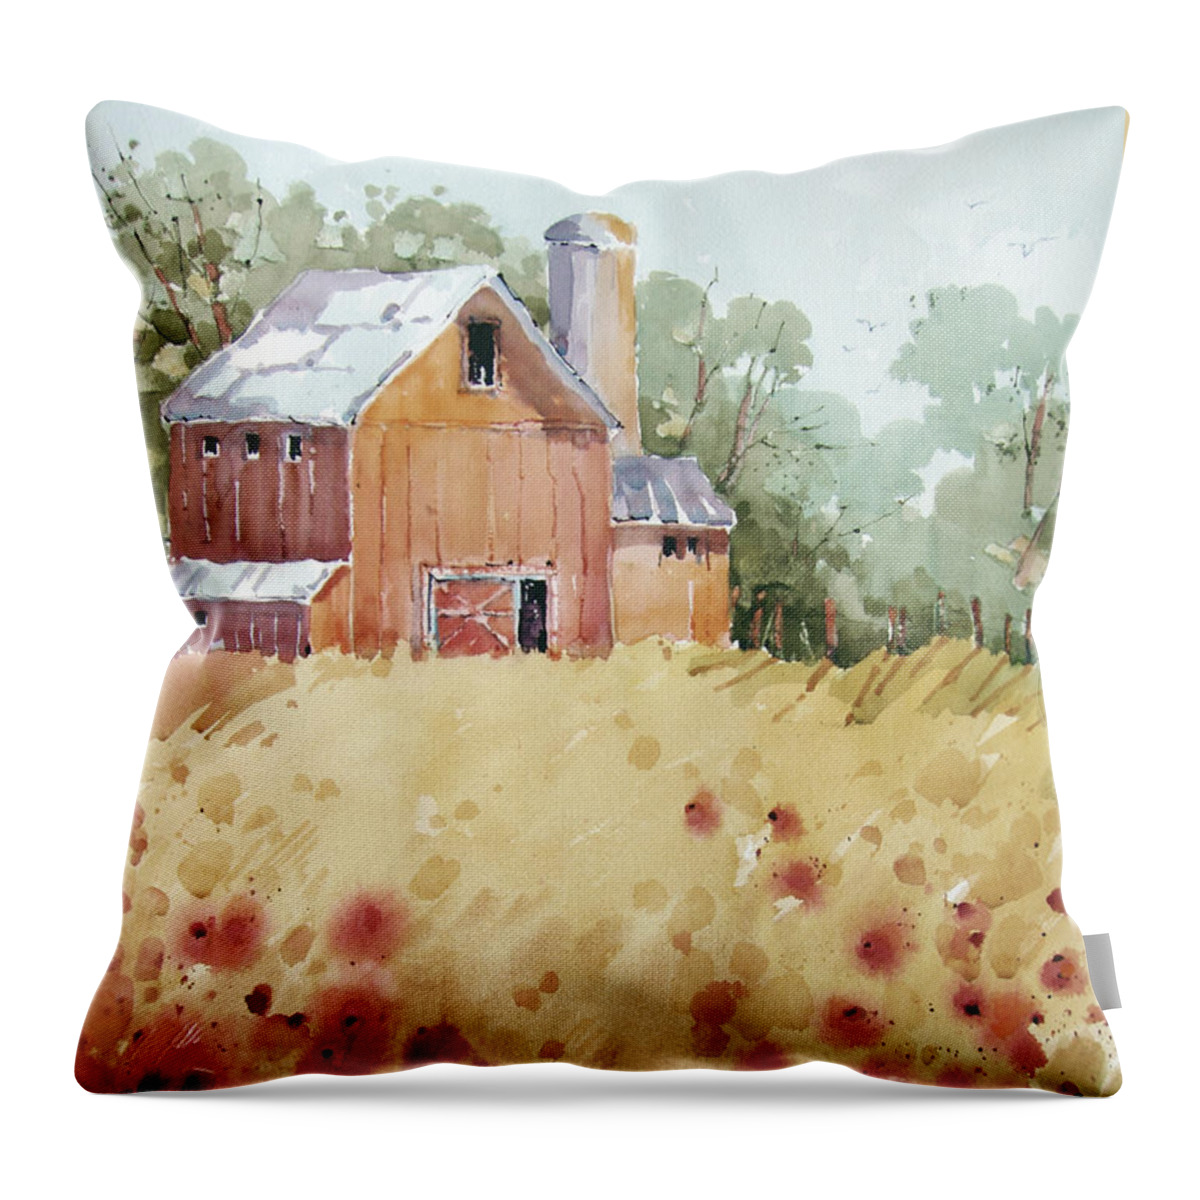 Barn Throw Pillow featuring the painting Wild Poppies by Joyce Hicks